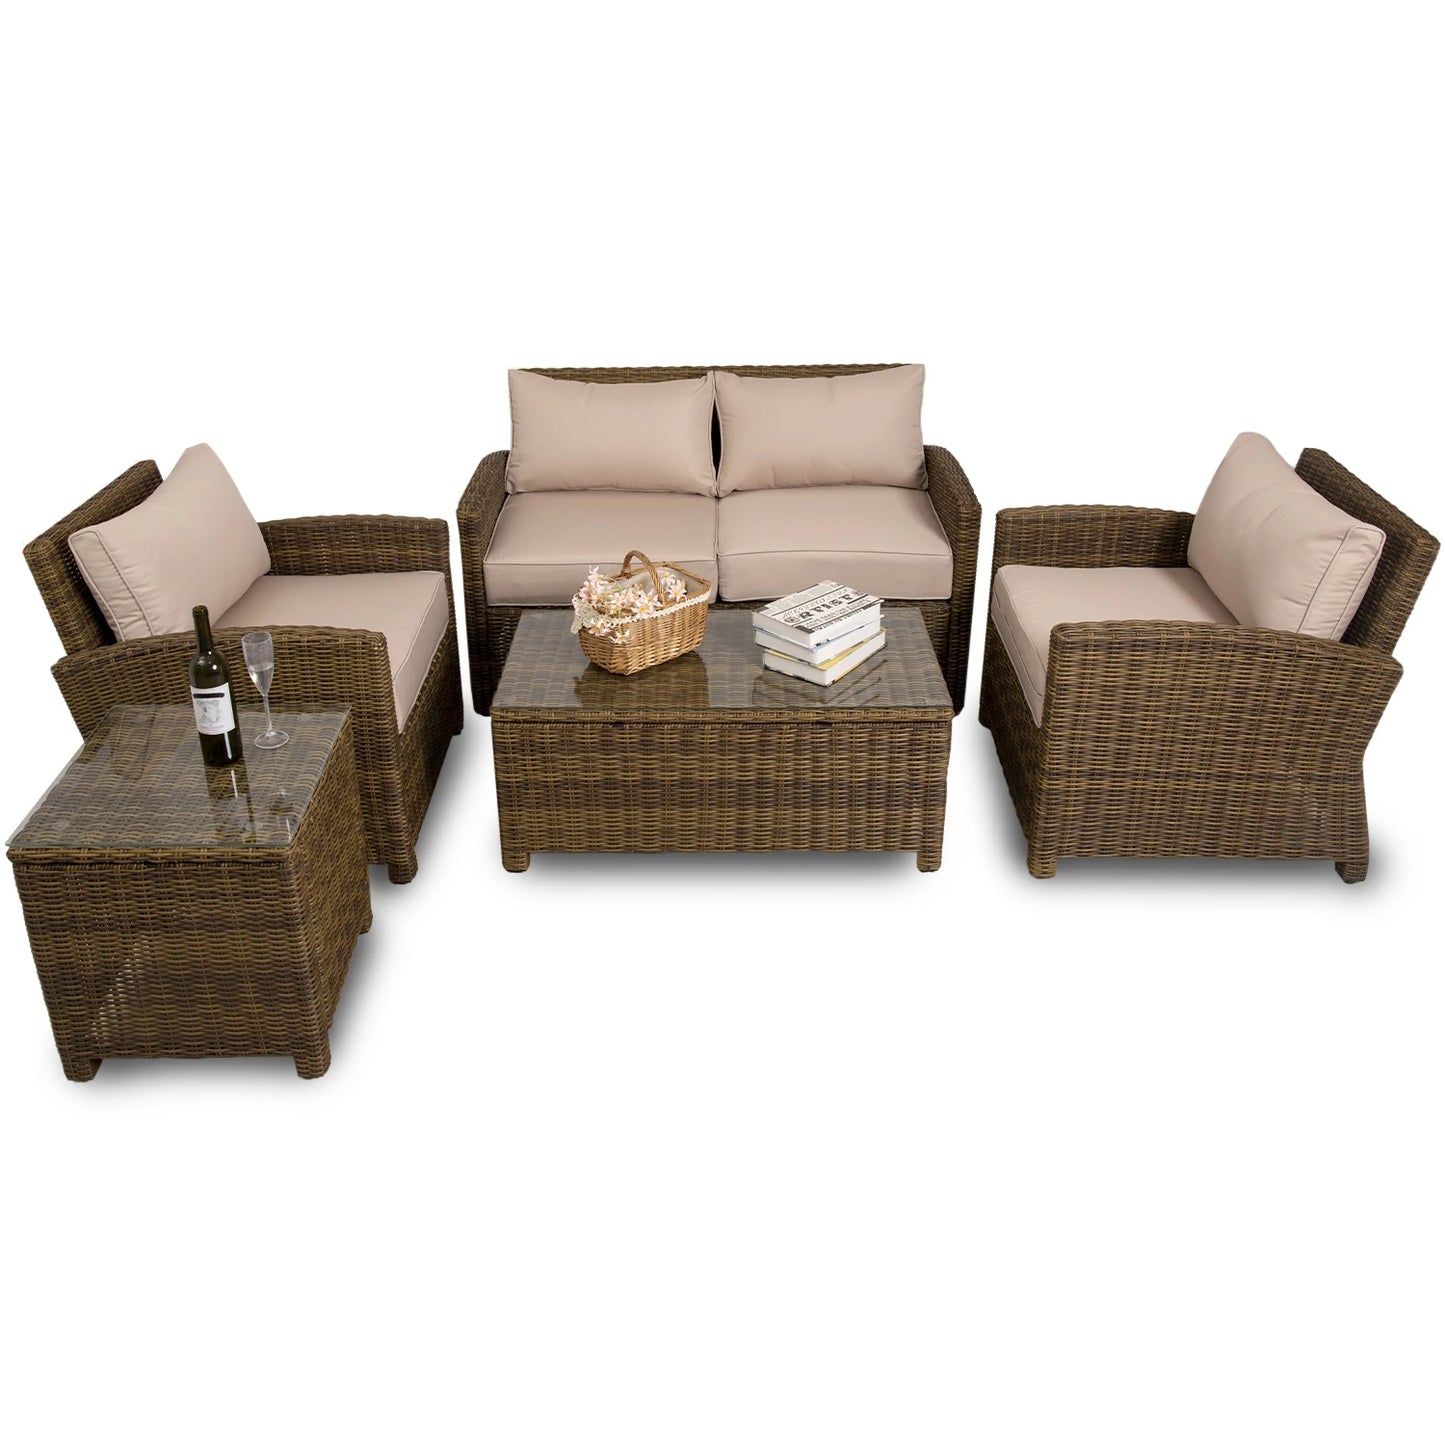 5 Pieces Patio Furniture Set with Glass Tables Soft Cushion Sectional Sofa